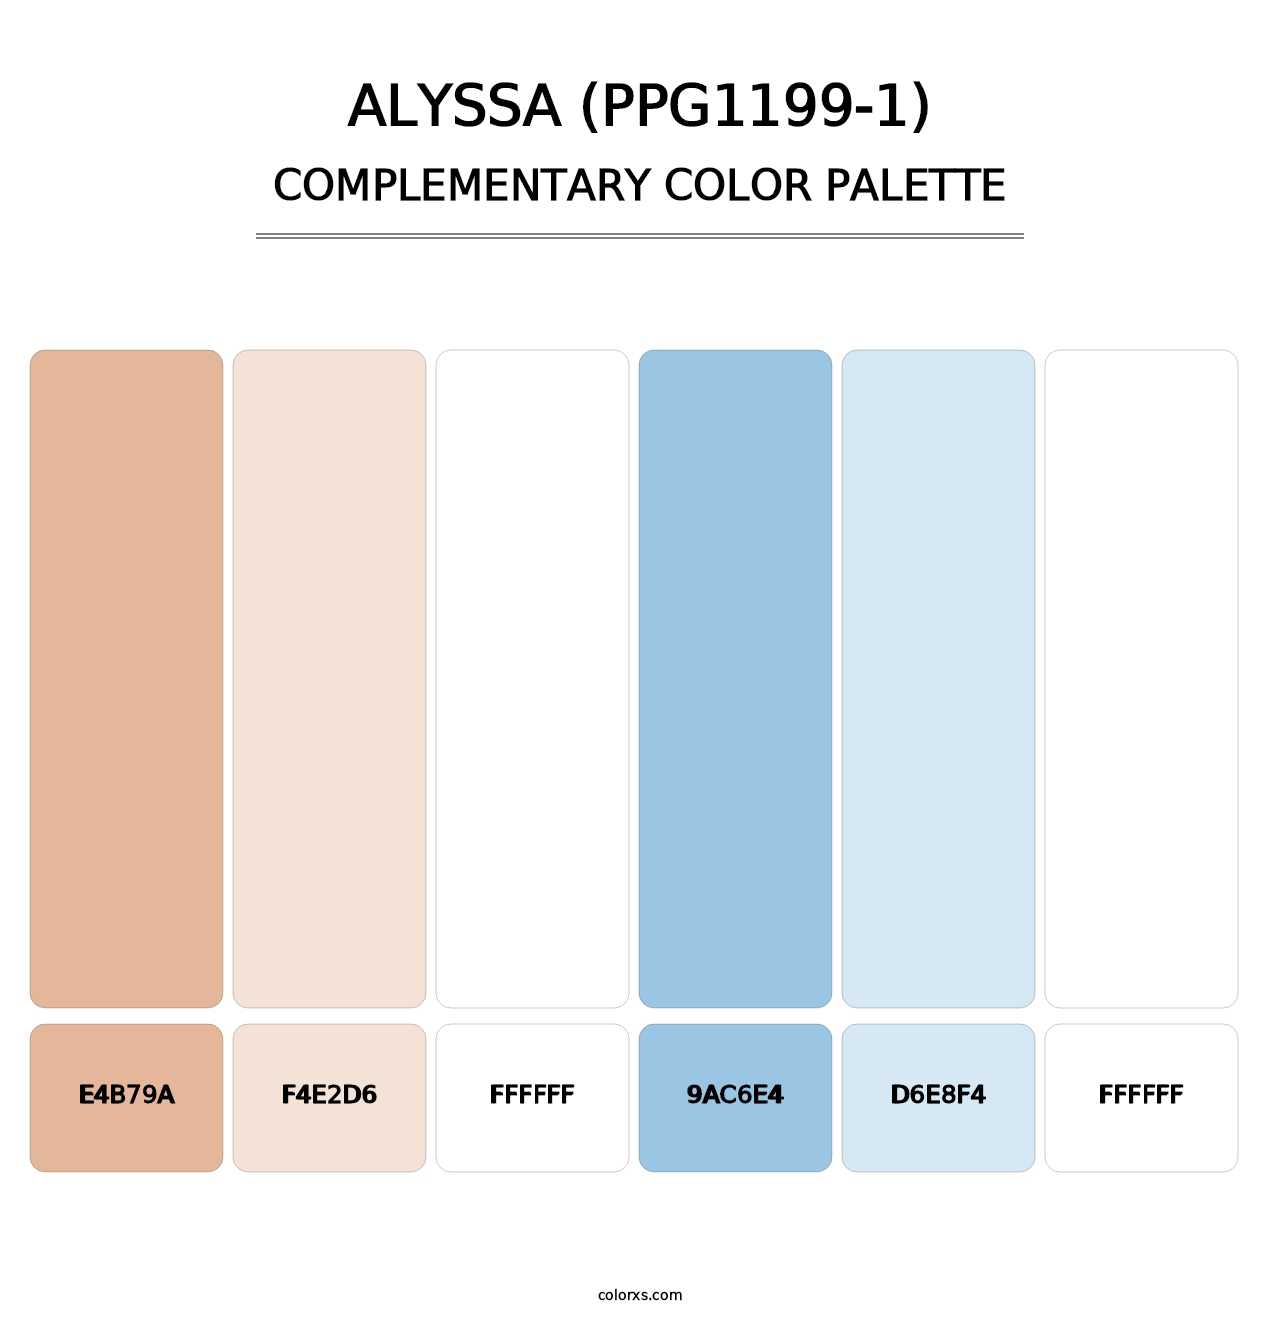 Alyssa (PPG1199-1) - Complementary Color Palette